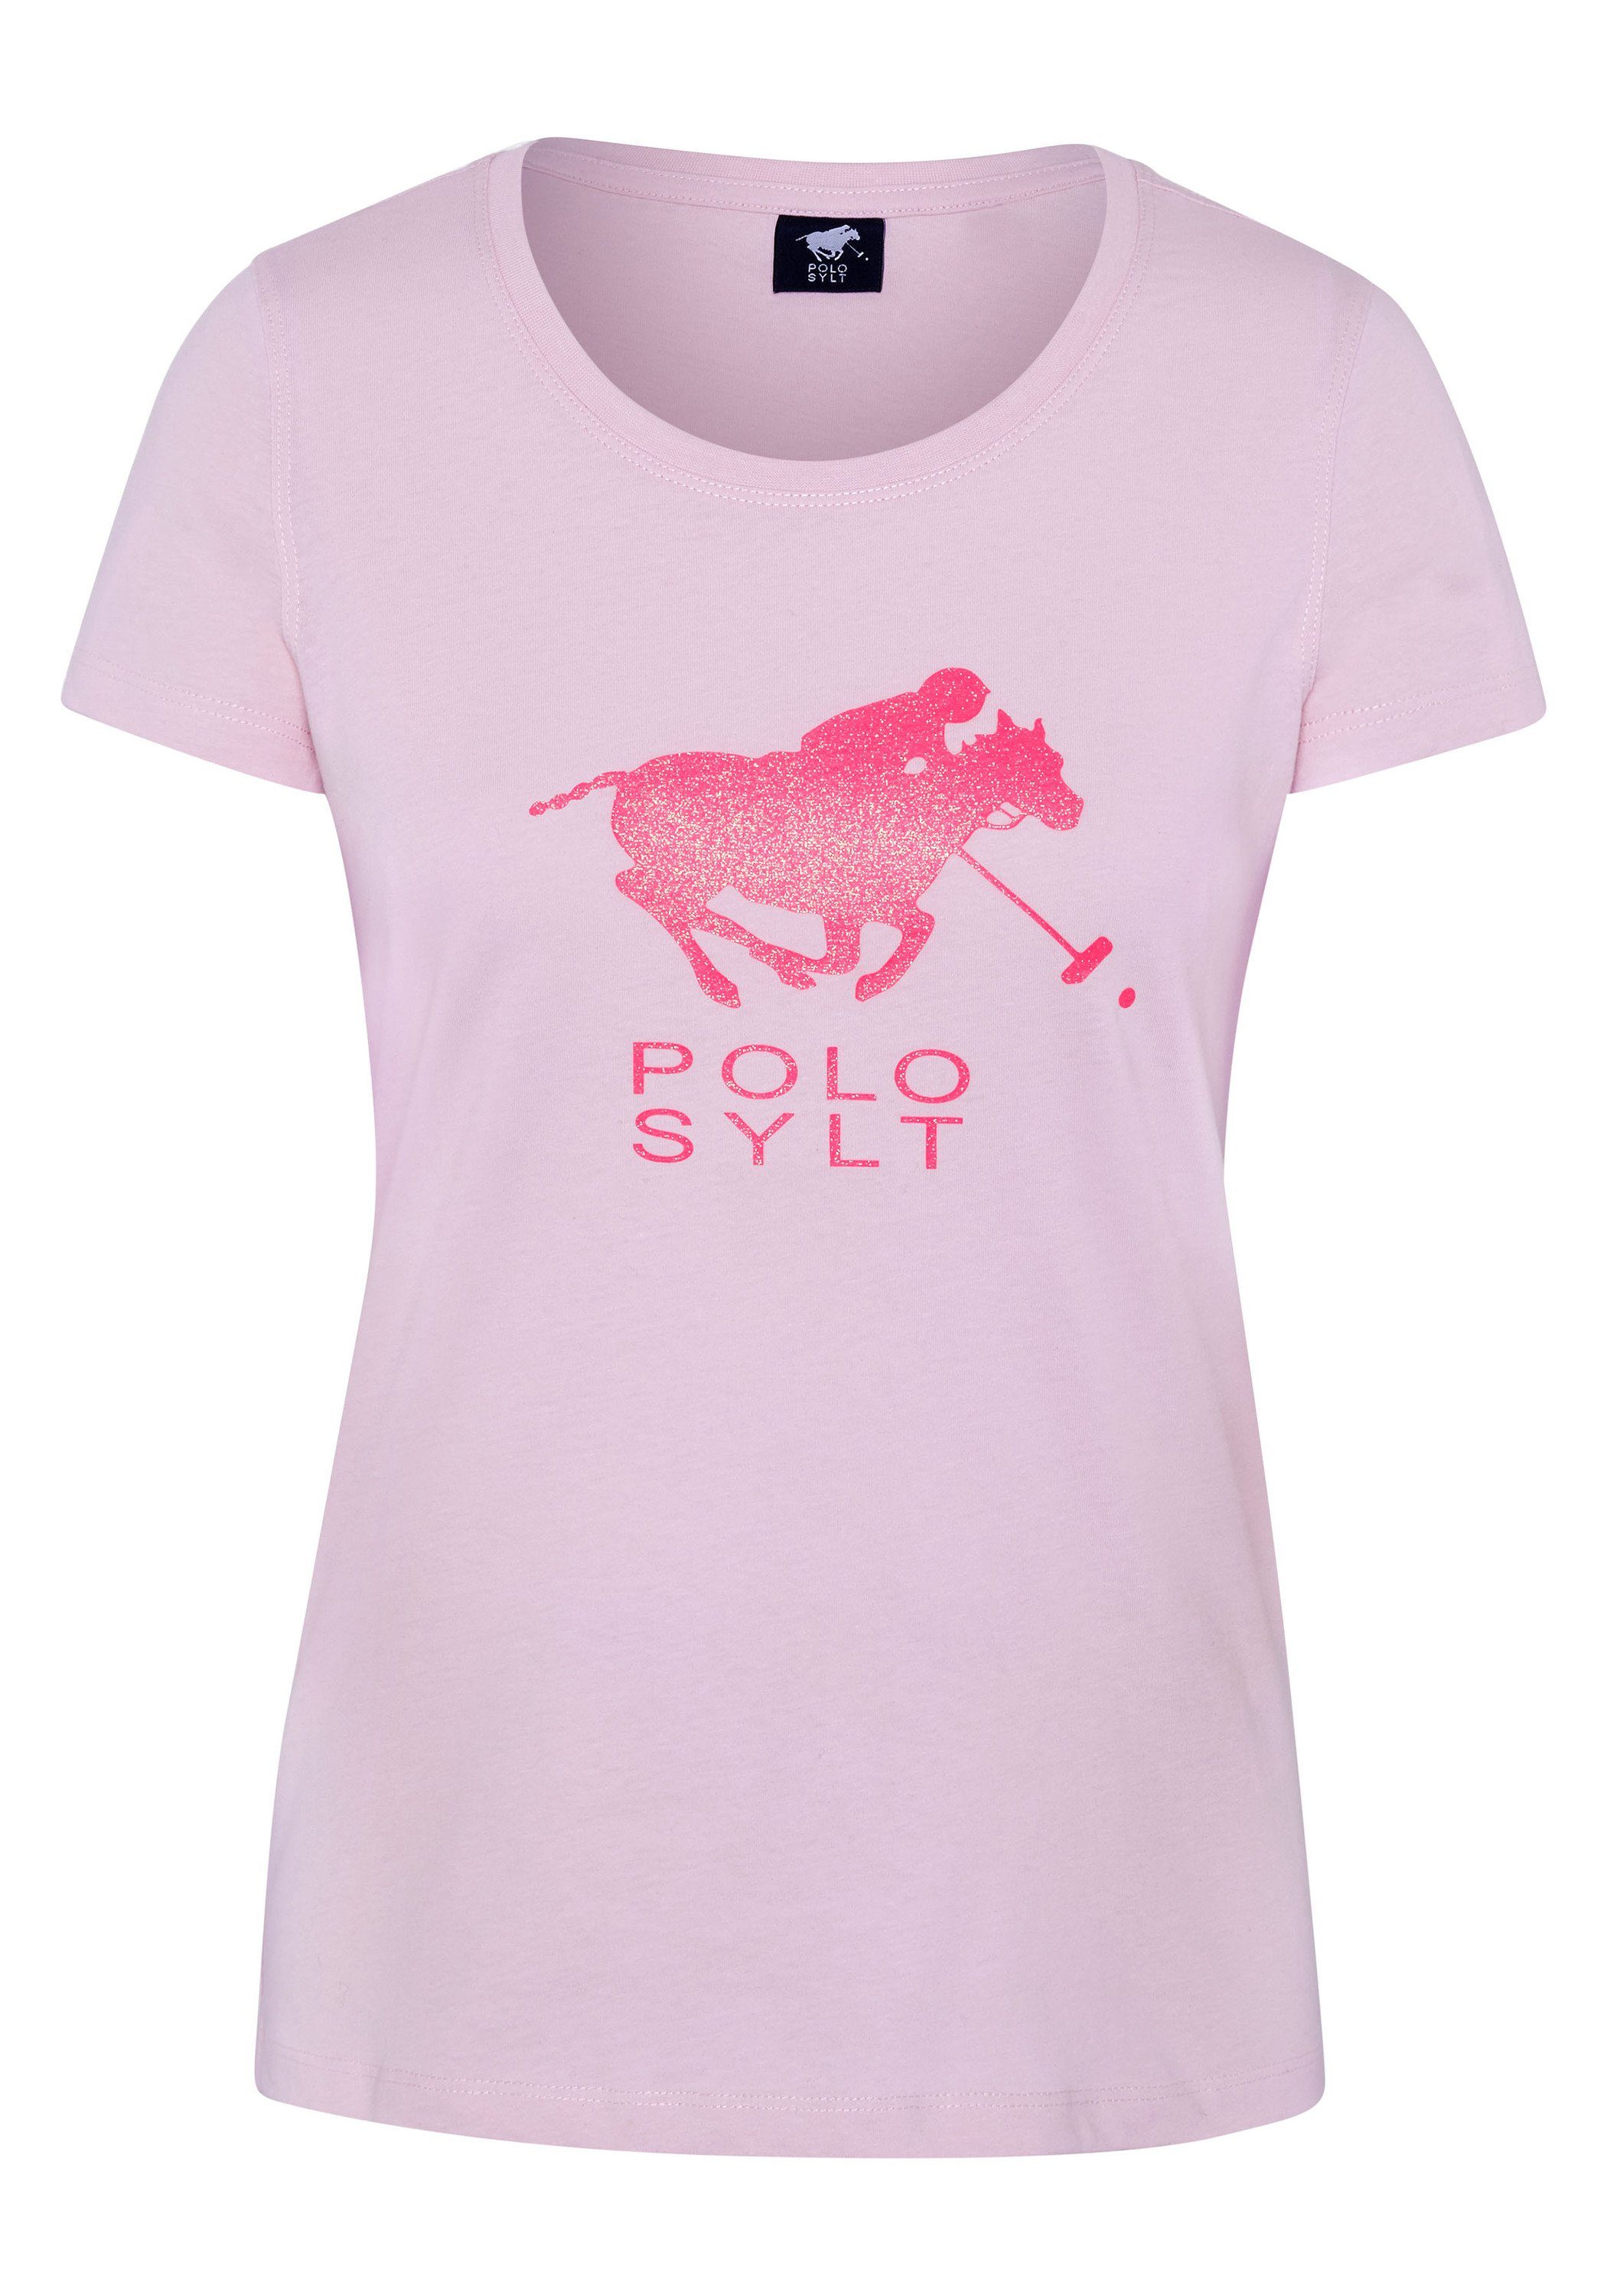 Passform Pink figurbetonter Print-Shirt Lady Polo in Sylt